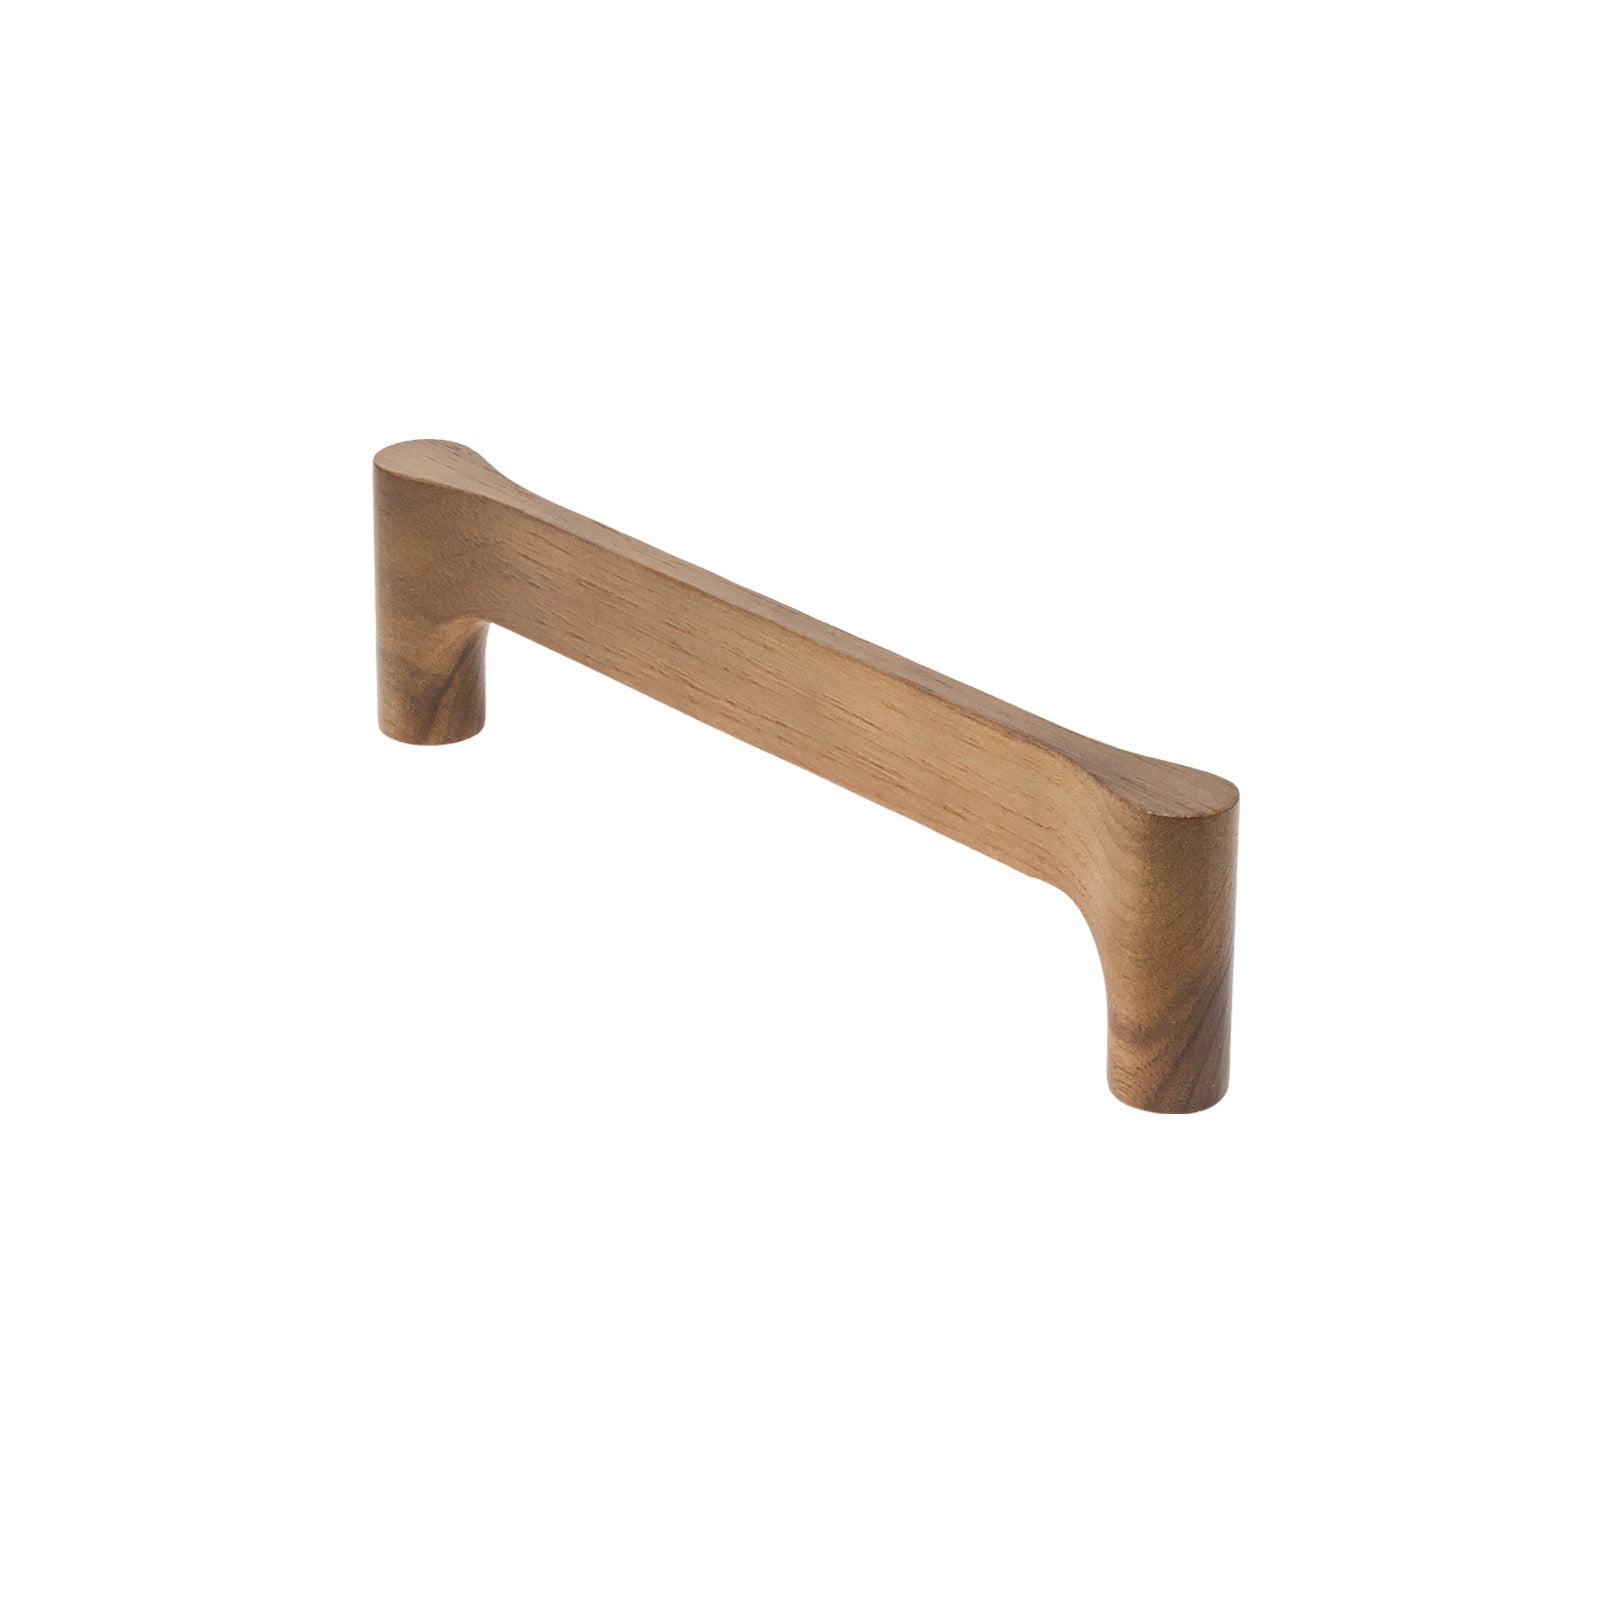 SHOW 160mm Gio Cabinet Pull Handle In Walnut Finish